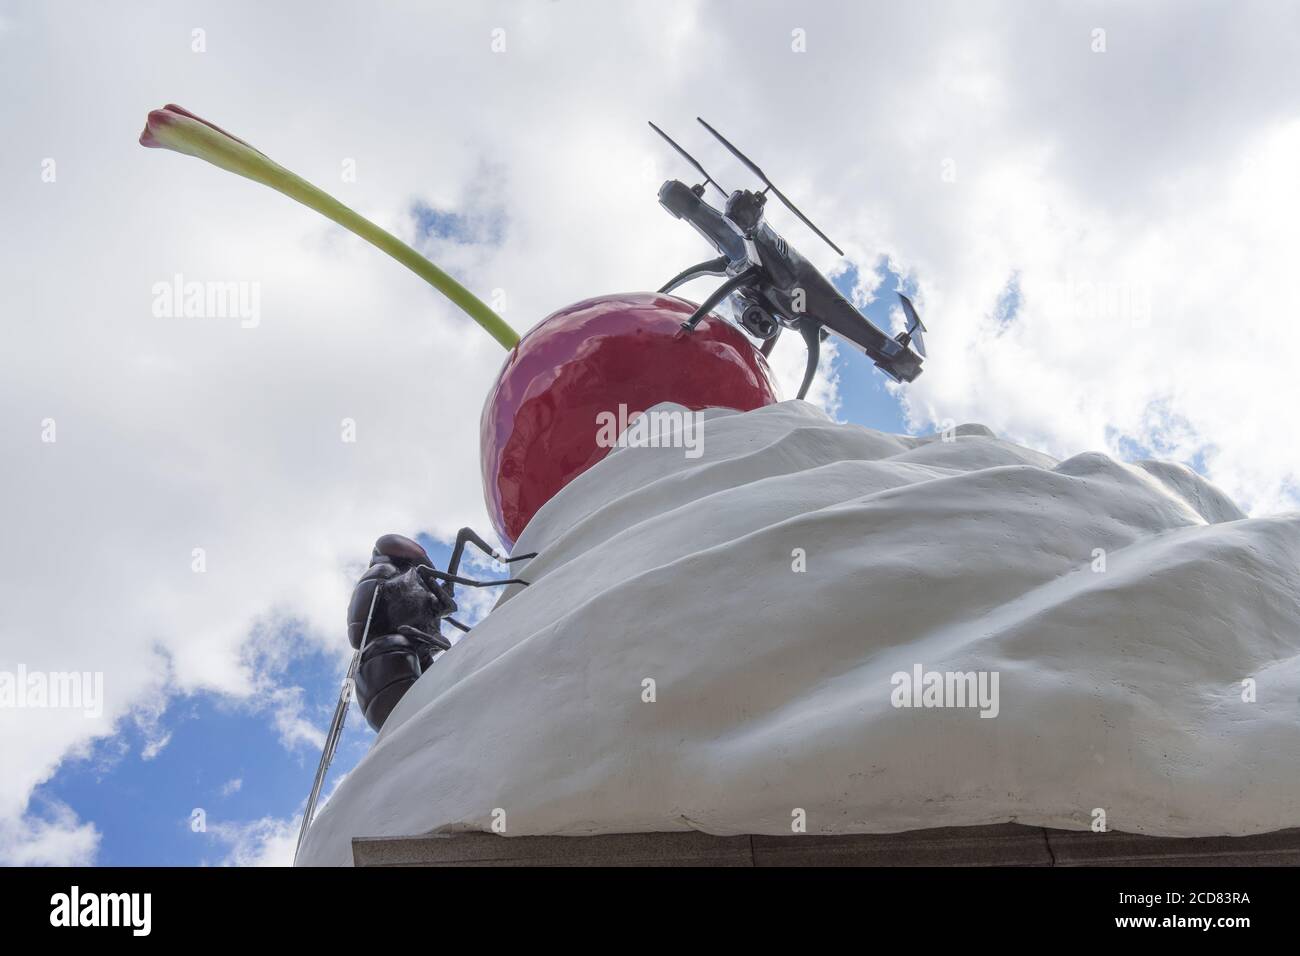 The End sculpture on the forth plinth in Trafalgar Square. Whipped cream, a fly and a drone on a cherry. Close up view. London Stock Photo